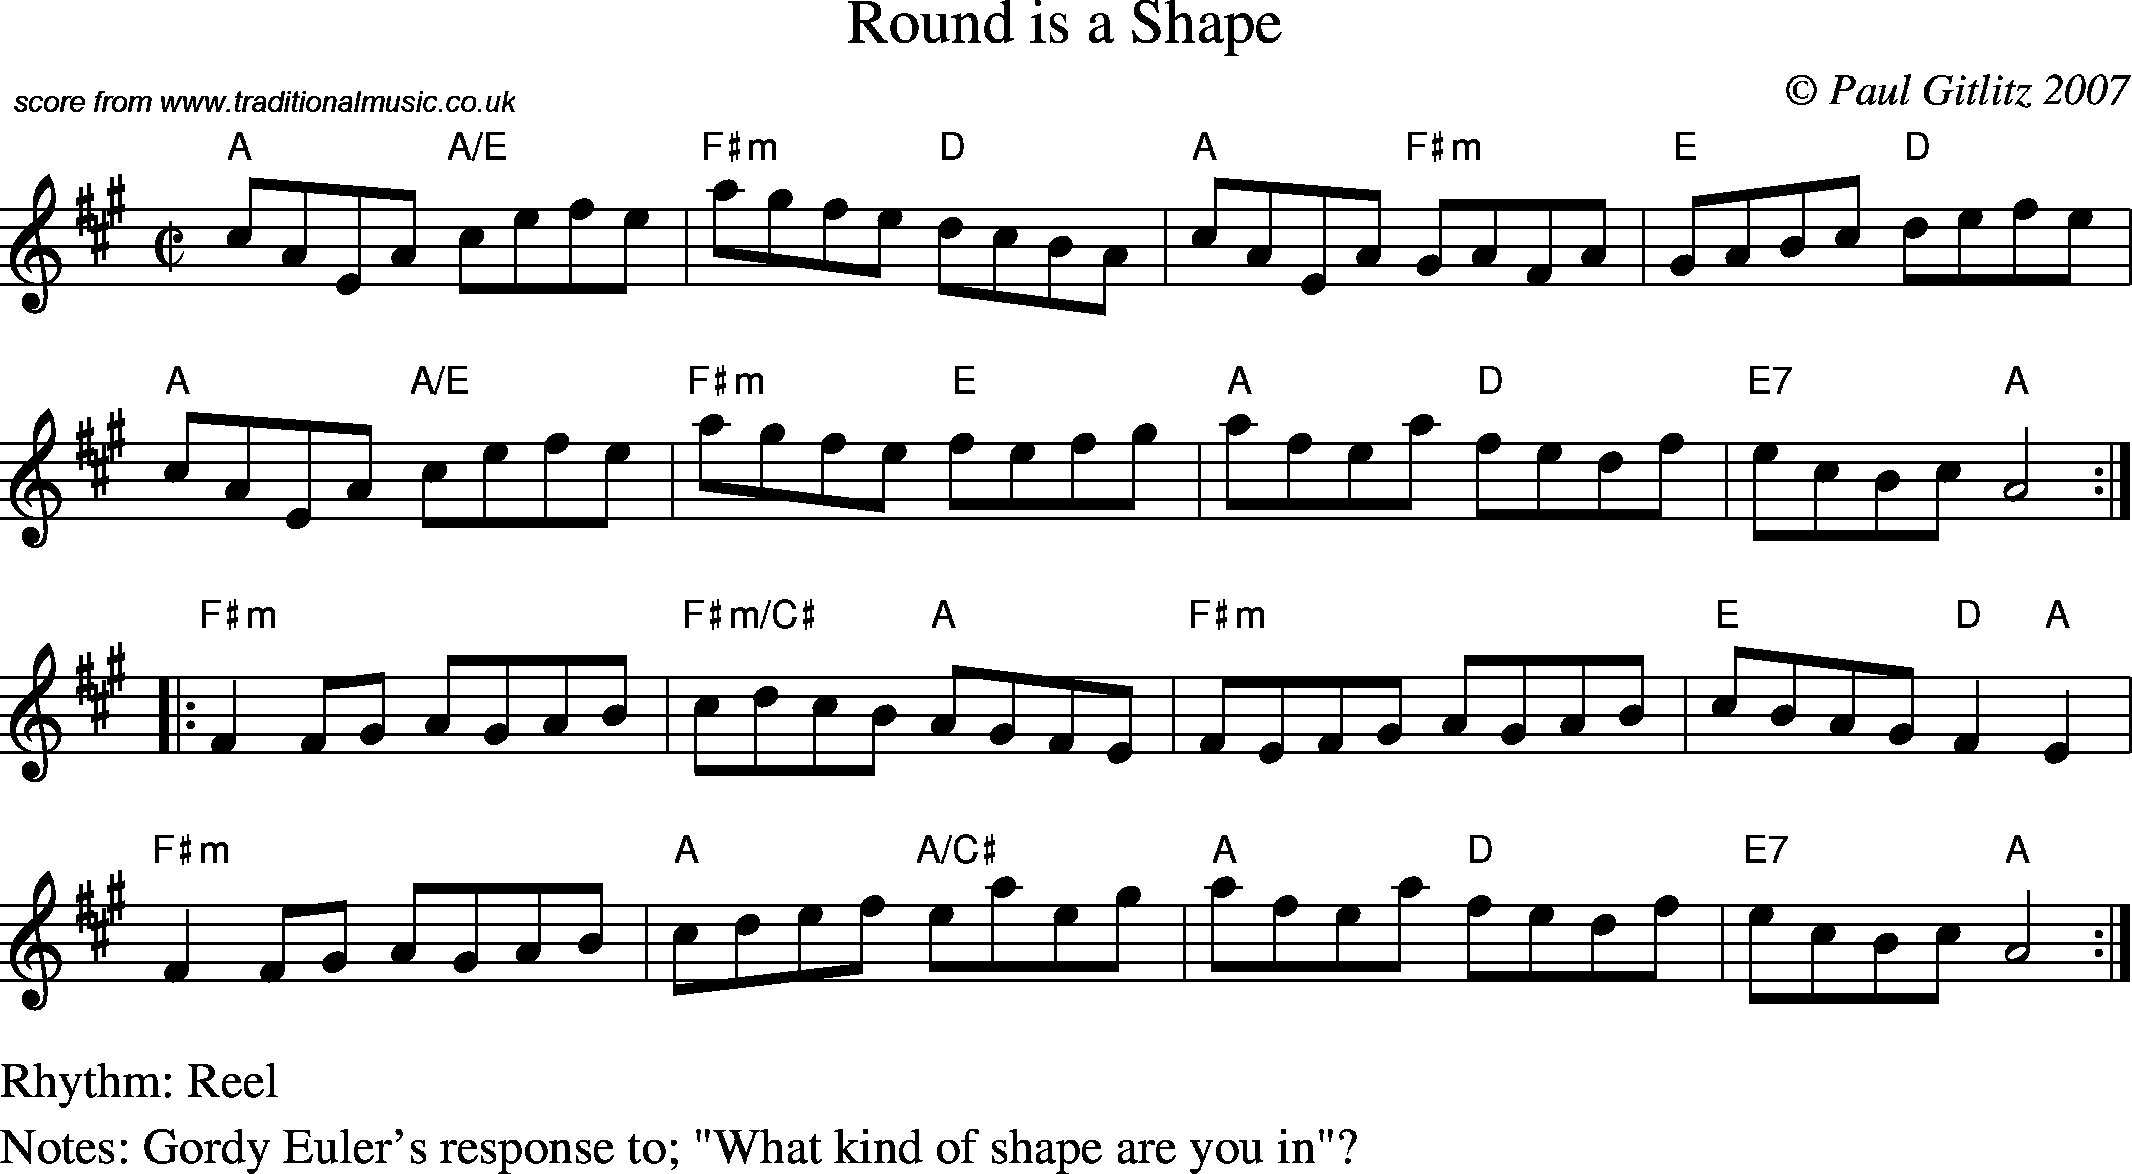 Sheet Music Score for Reel - Round is a Shape